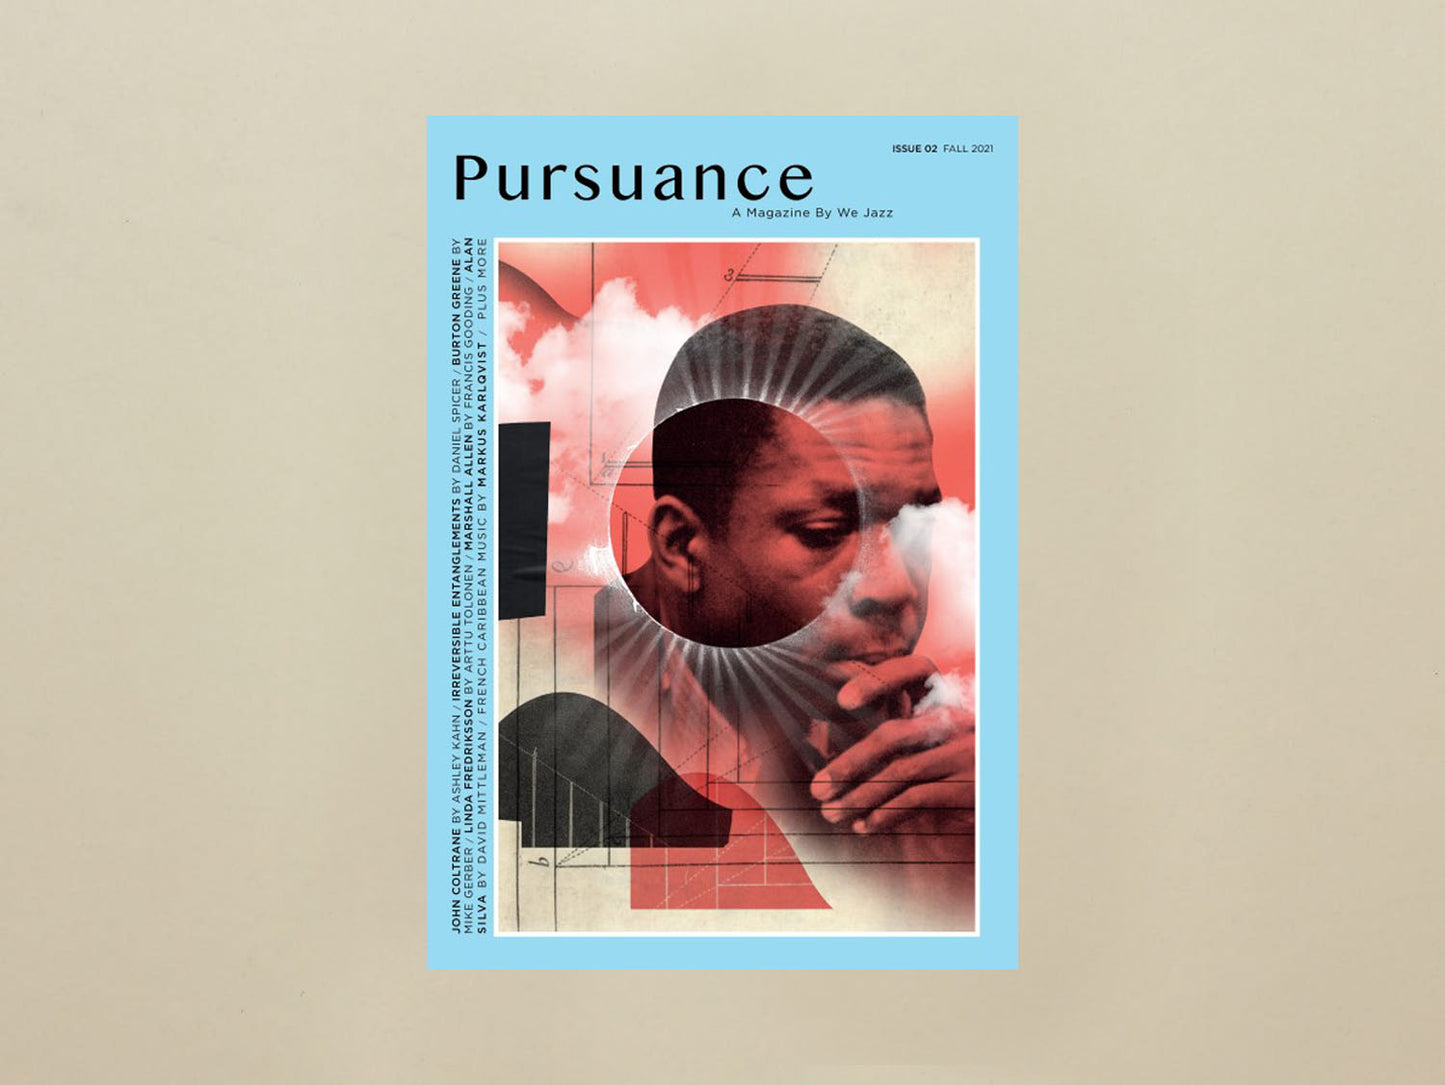 We Jazz Issue 2 Fall 2021 "Pursuance"